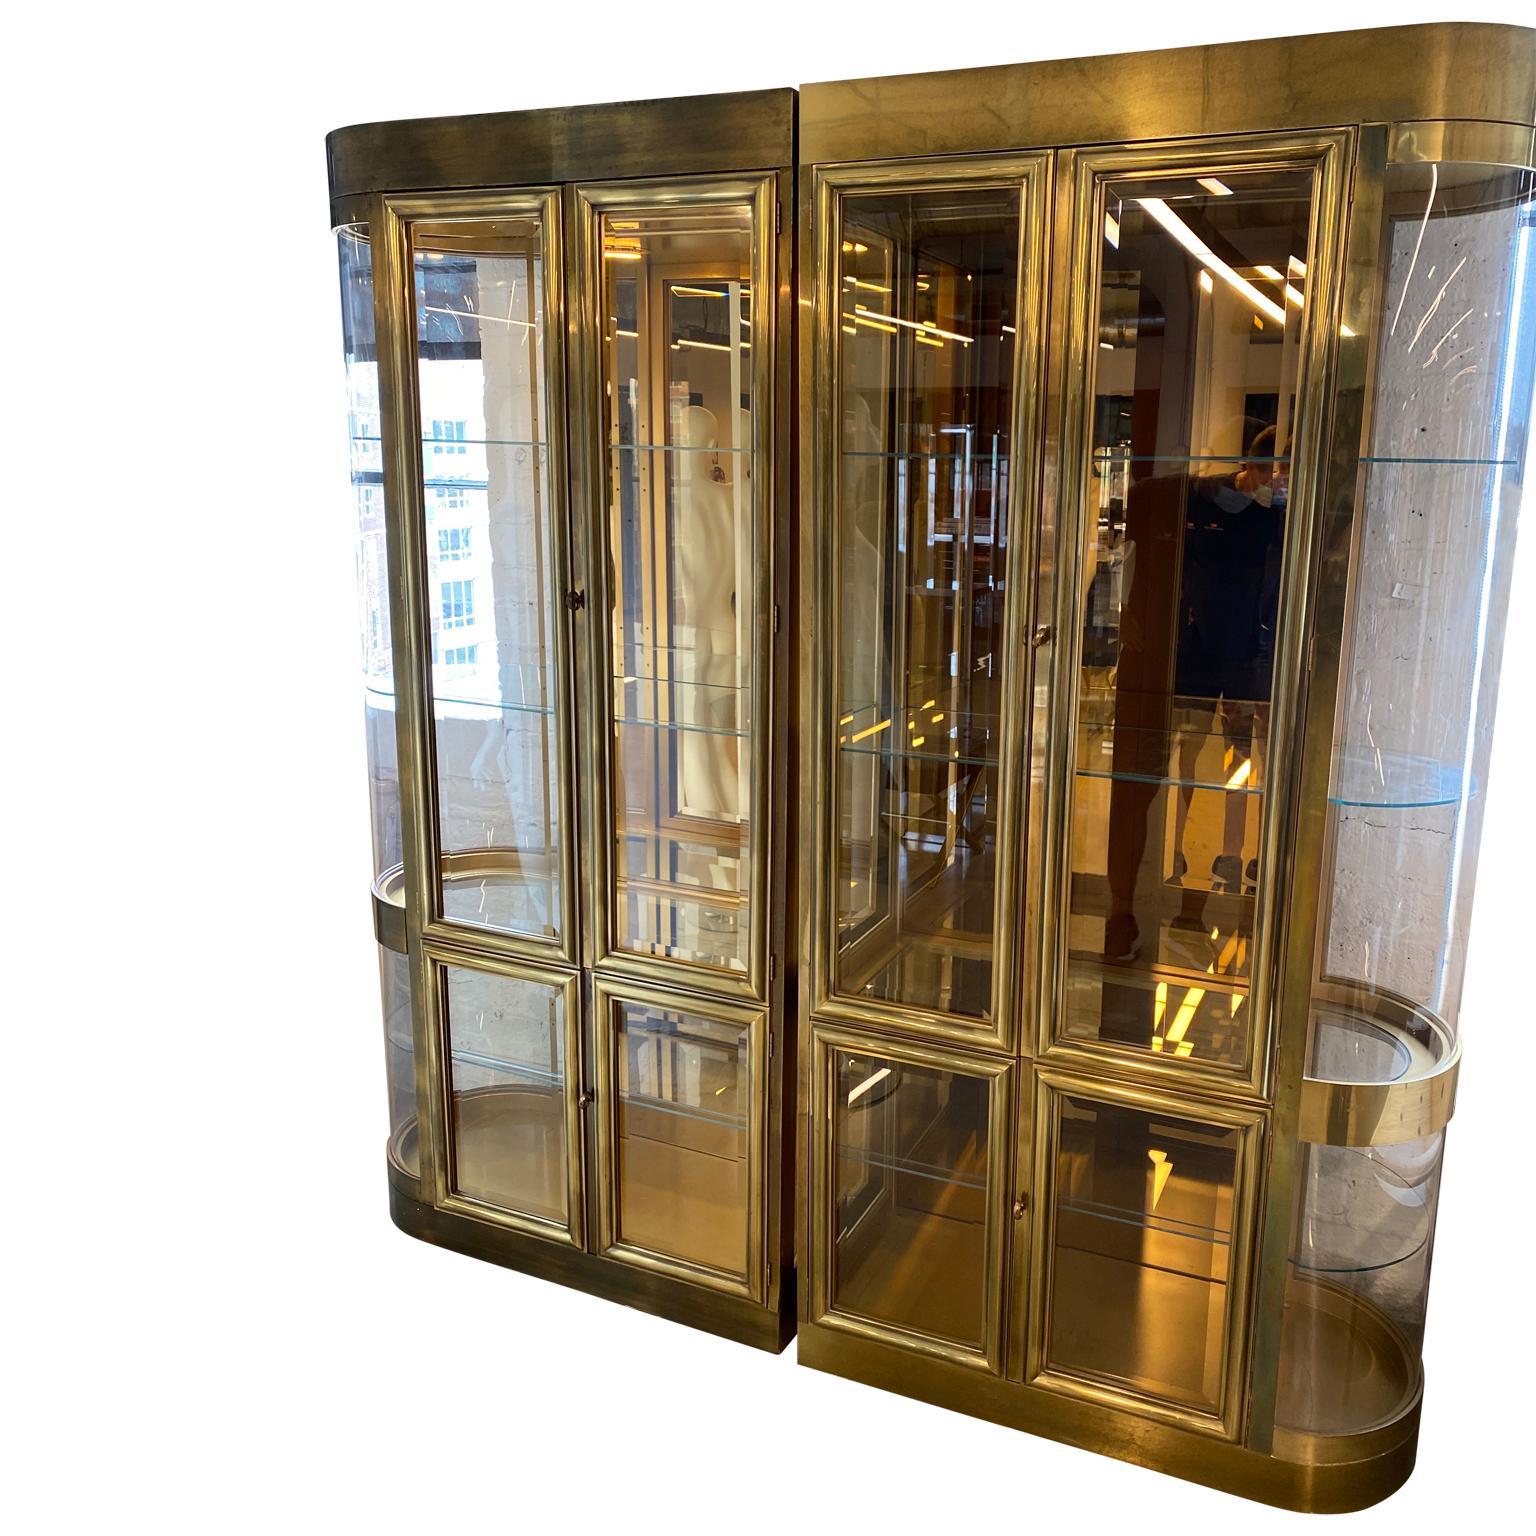 Four sets of two part Mastercraft designed curved brass and glass vitrines or display cabinet

This collection of 4 sets of Mastercraft brass vitrines or display cabinets all has curved Lucite sides and with mirrored back, glass shelves and